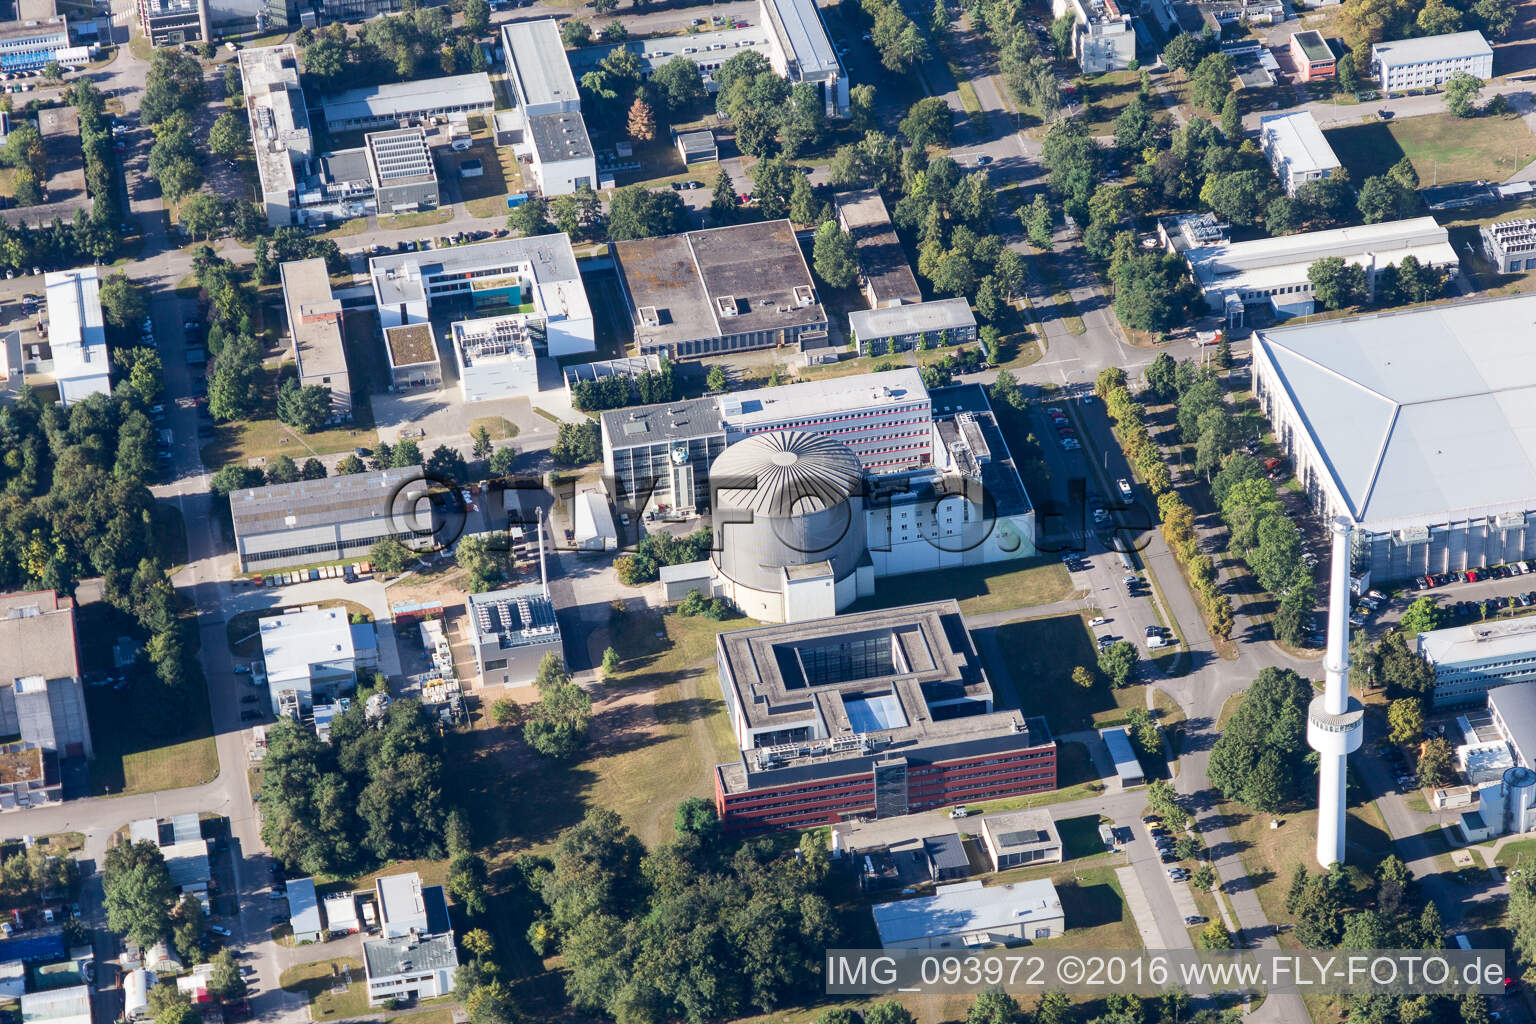 Campus building of the university KIT - Campus Nord (former Nuclear research centre Karlsruhe) in the district Leopoldshafen in Eggenstein-Leopoldshafen in the state Baden-Wurttemberg, Germany seen from above